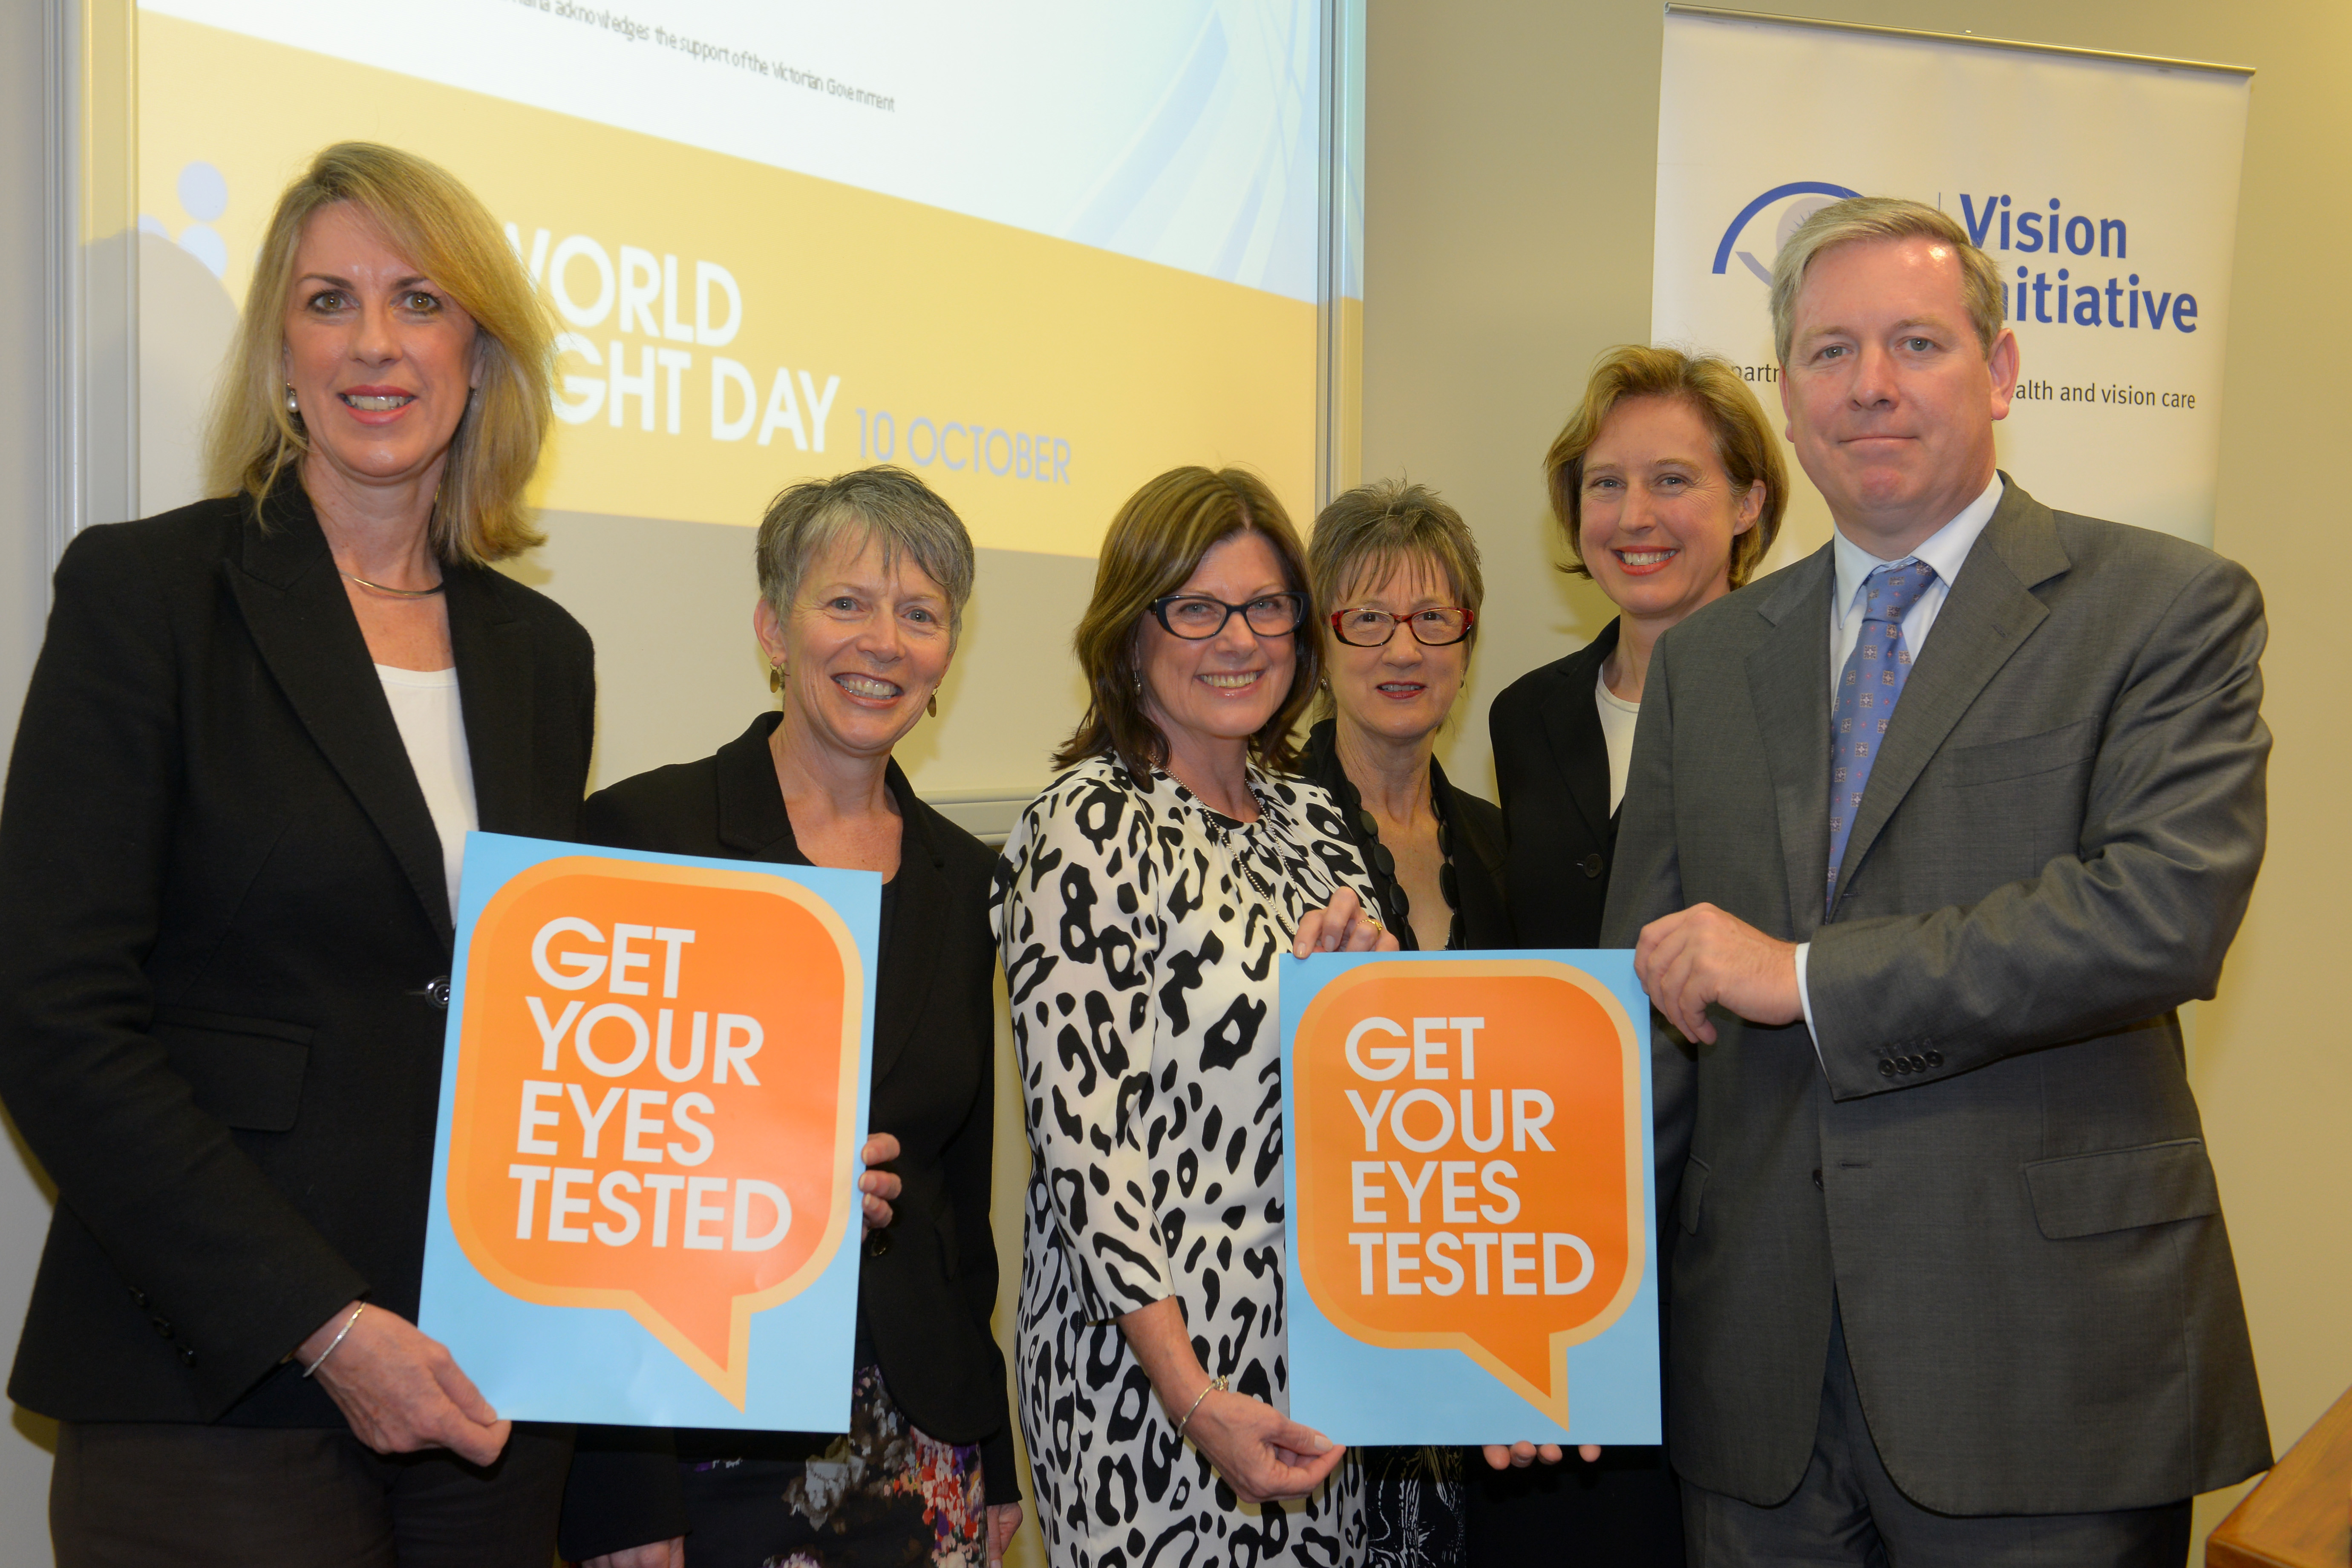 Vision Initiative pilot project launch on World Sight Day 2013